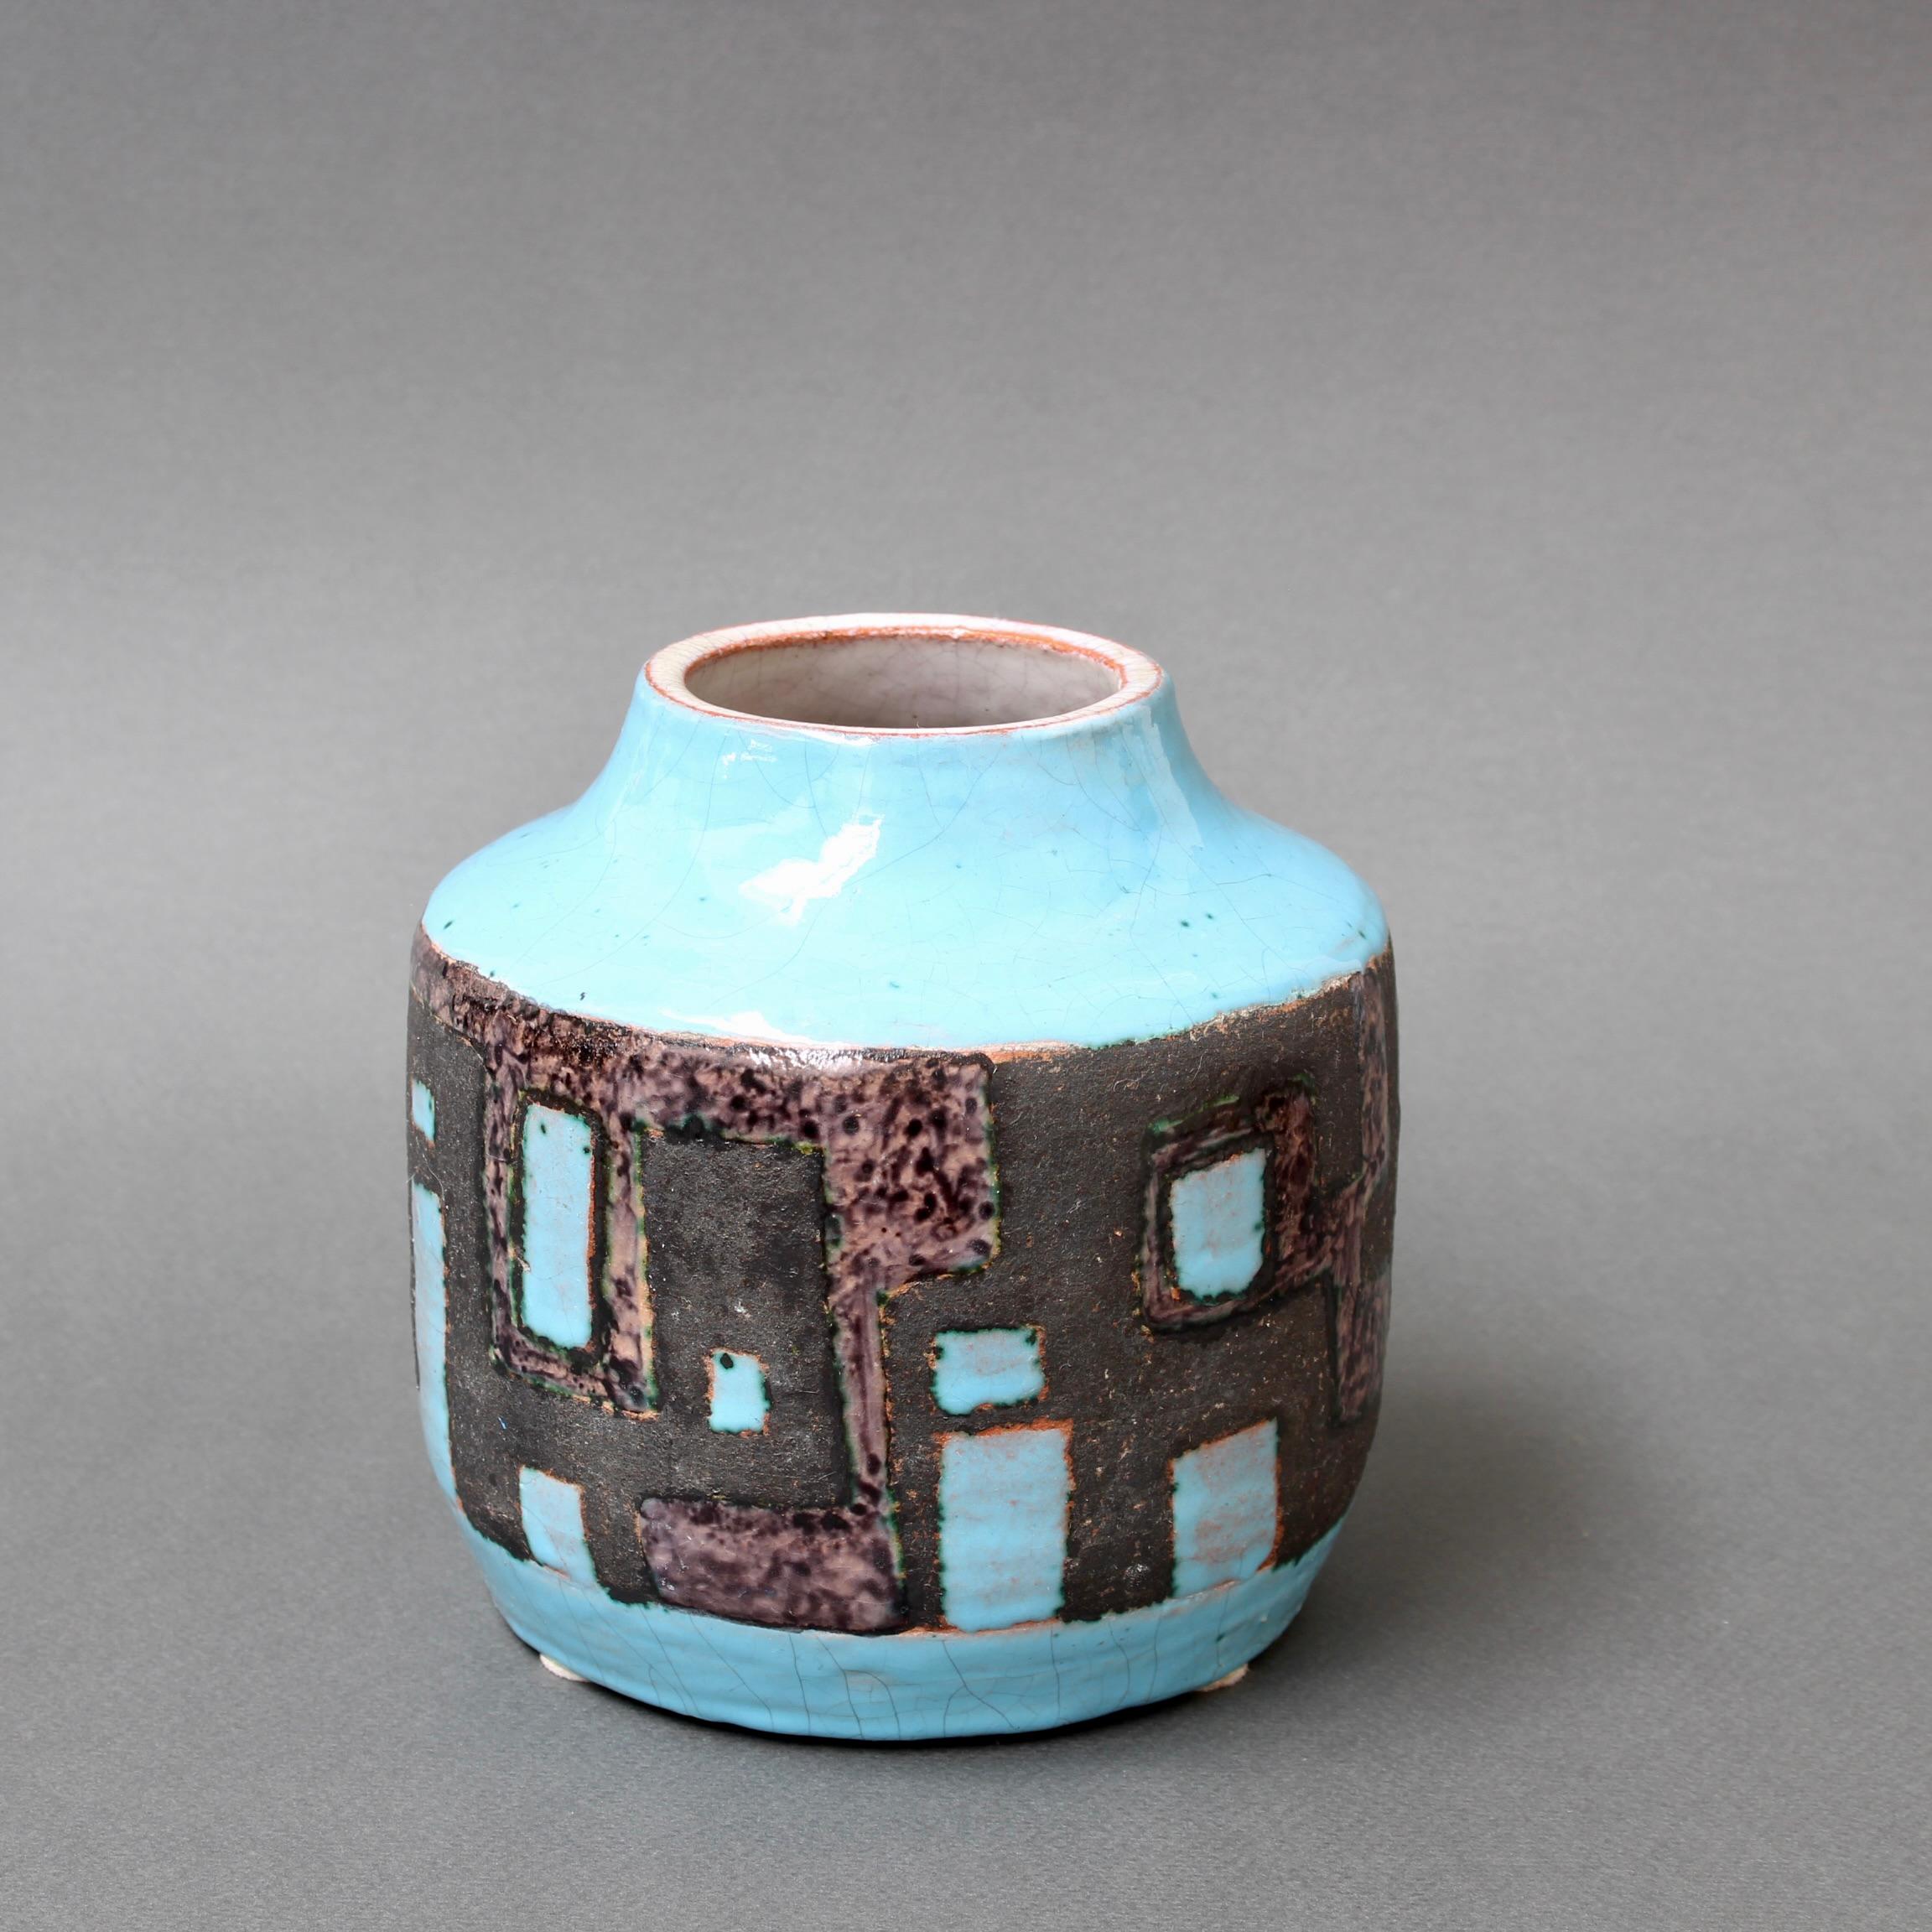 Mid-20th Century French Decorative Ceramic Vase by Jean-Claude Courjault '1961'